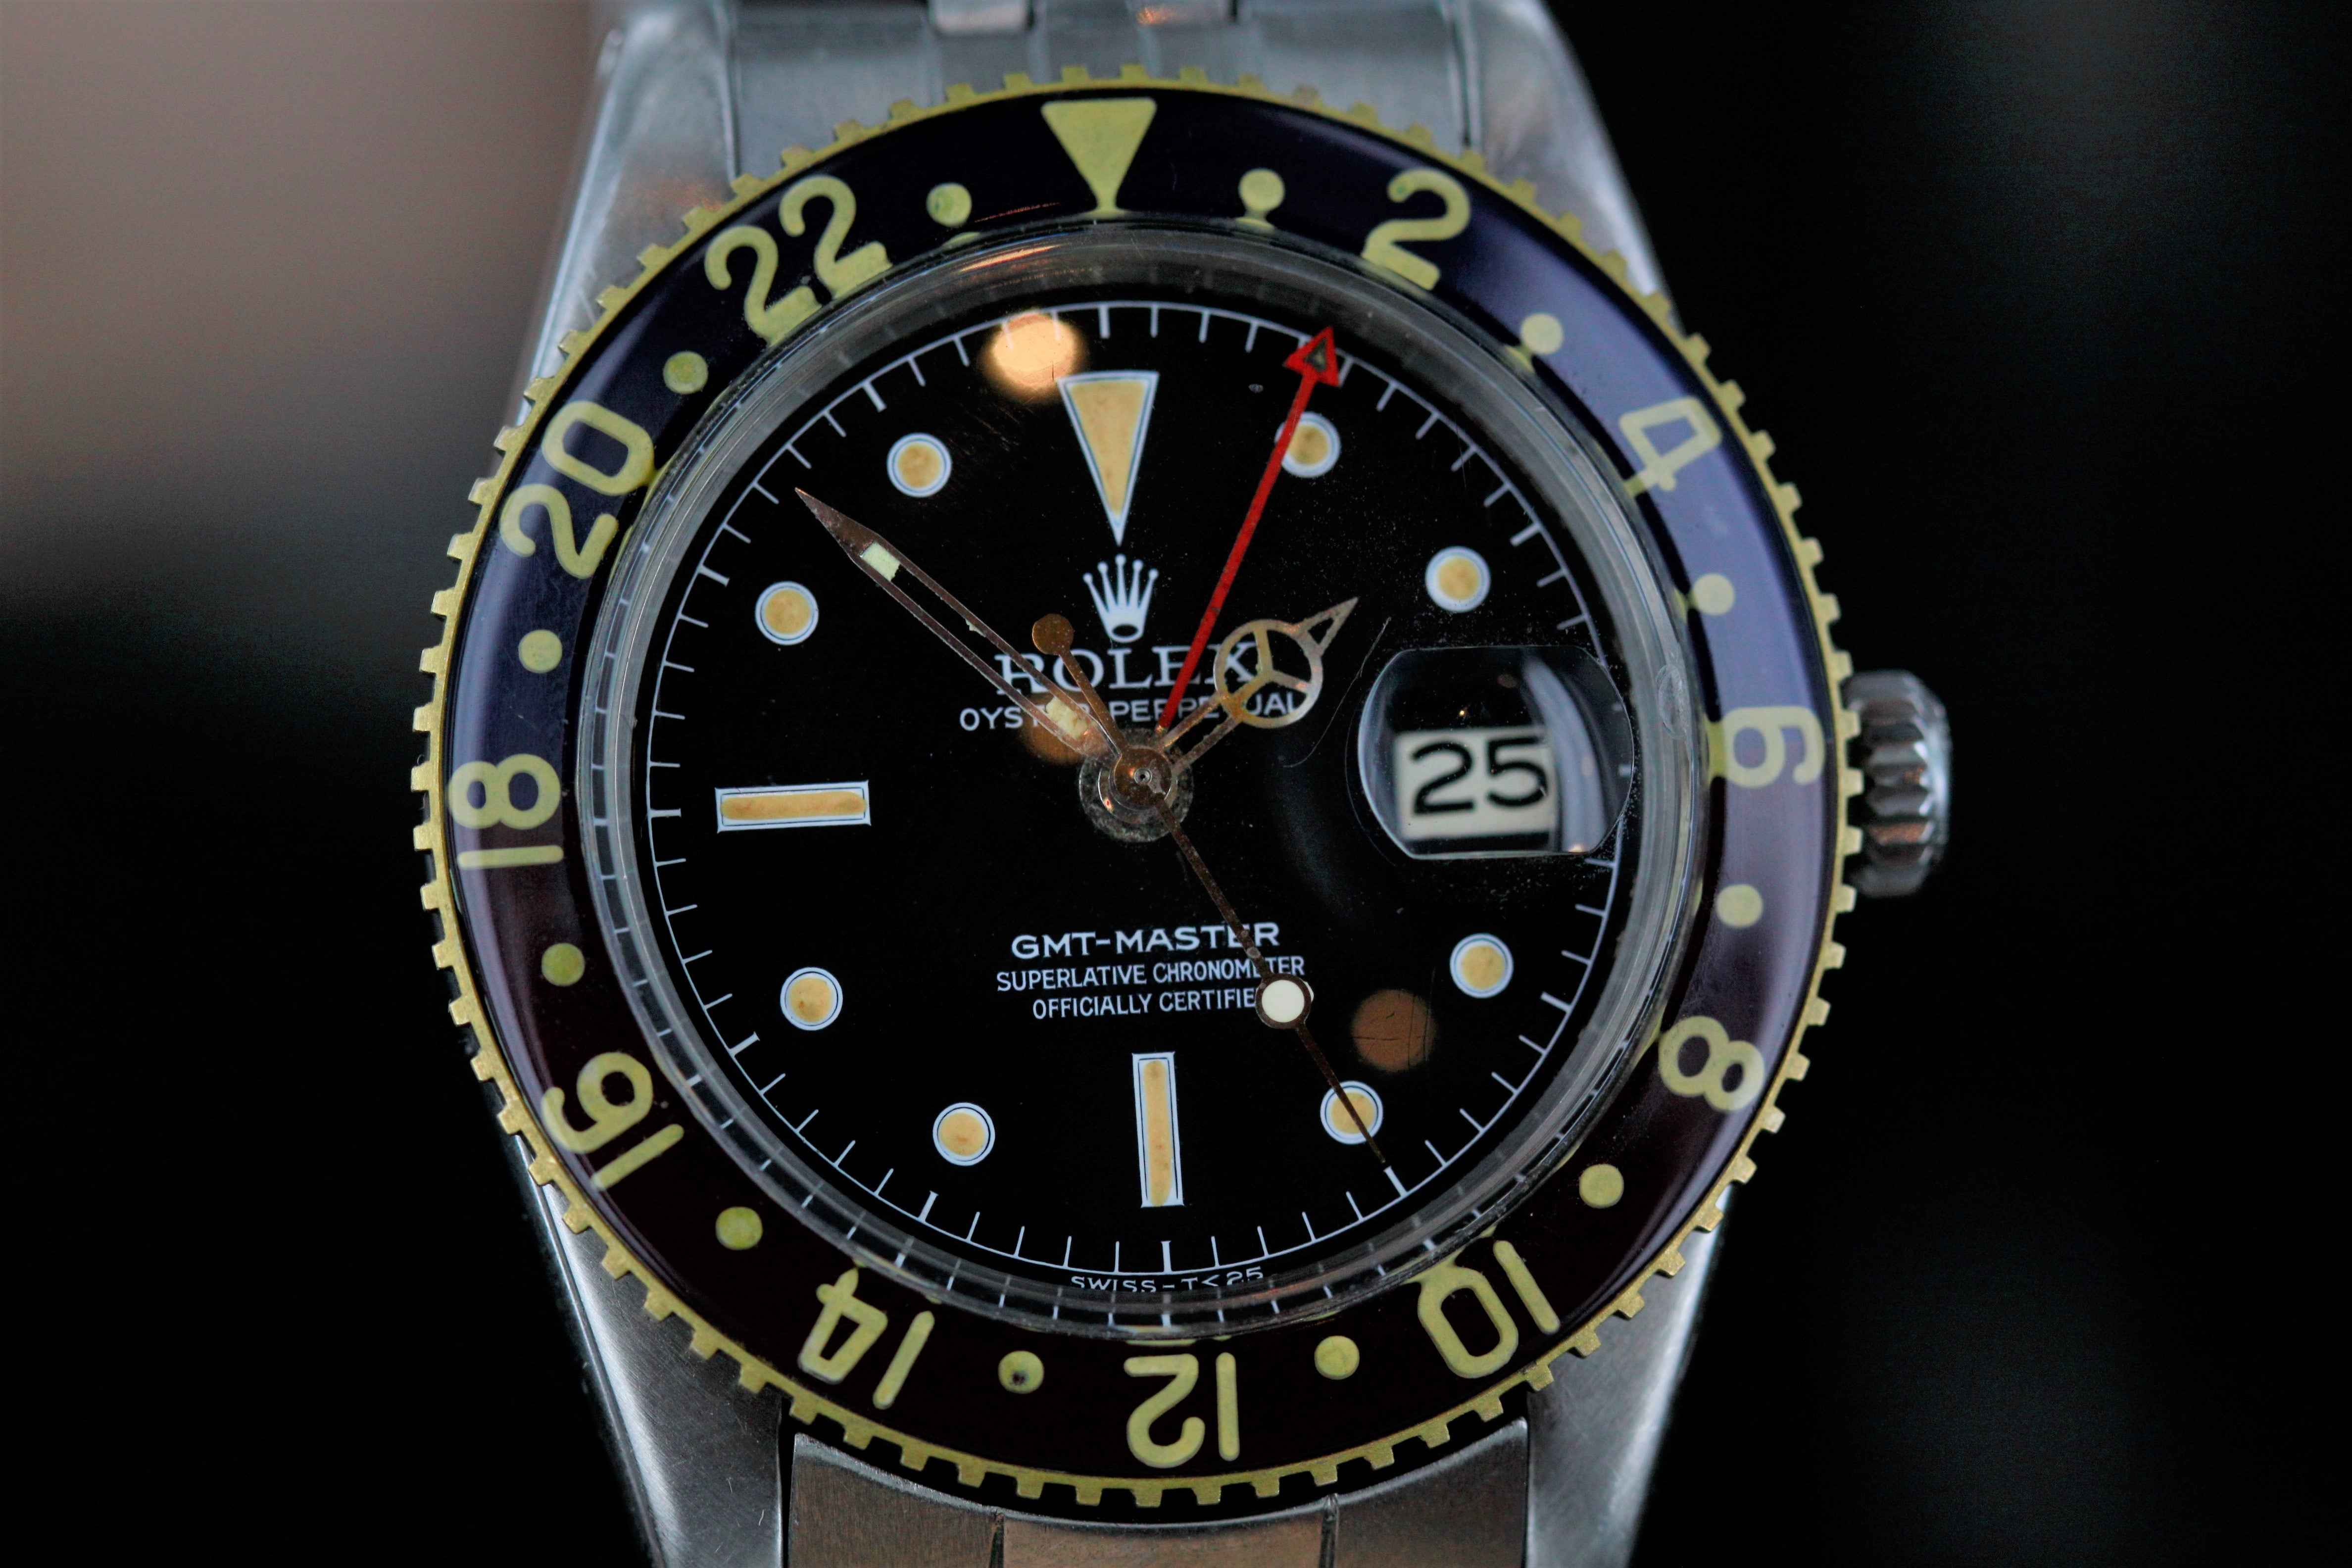 Rolex Gmt-Master Ref.6542 Pussy Galore from 1959